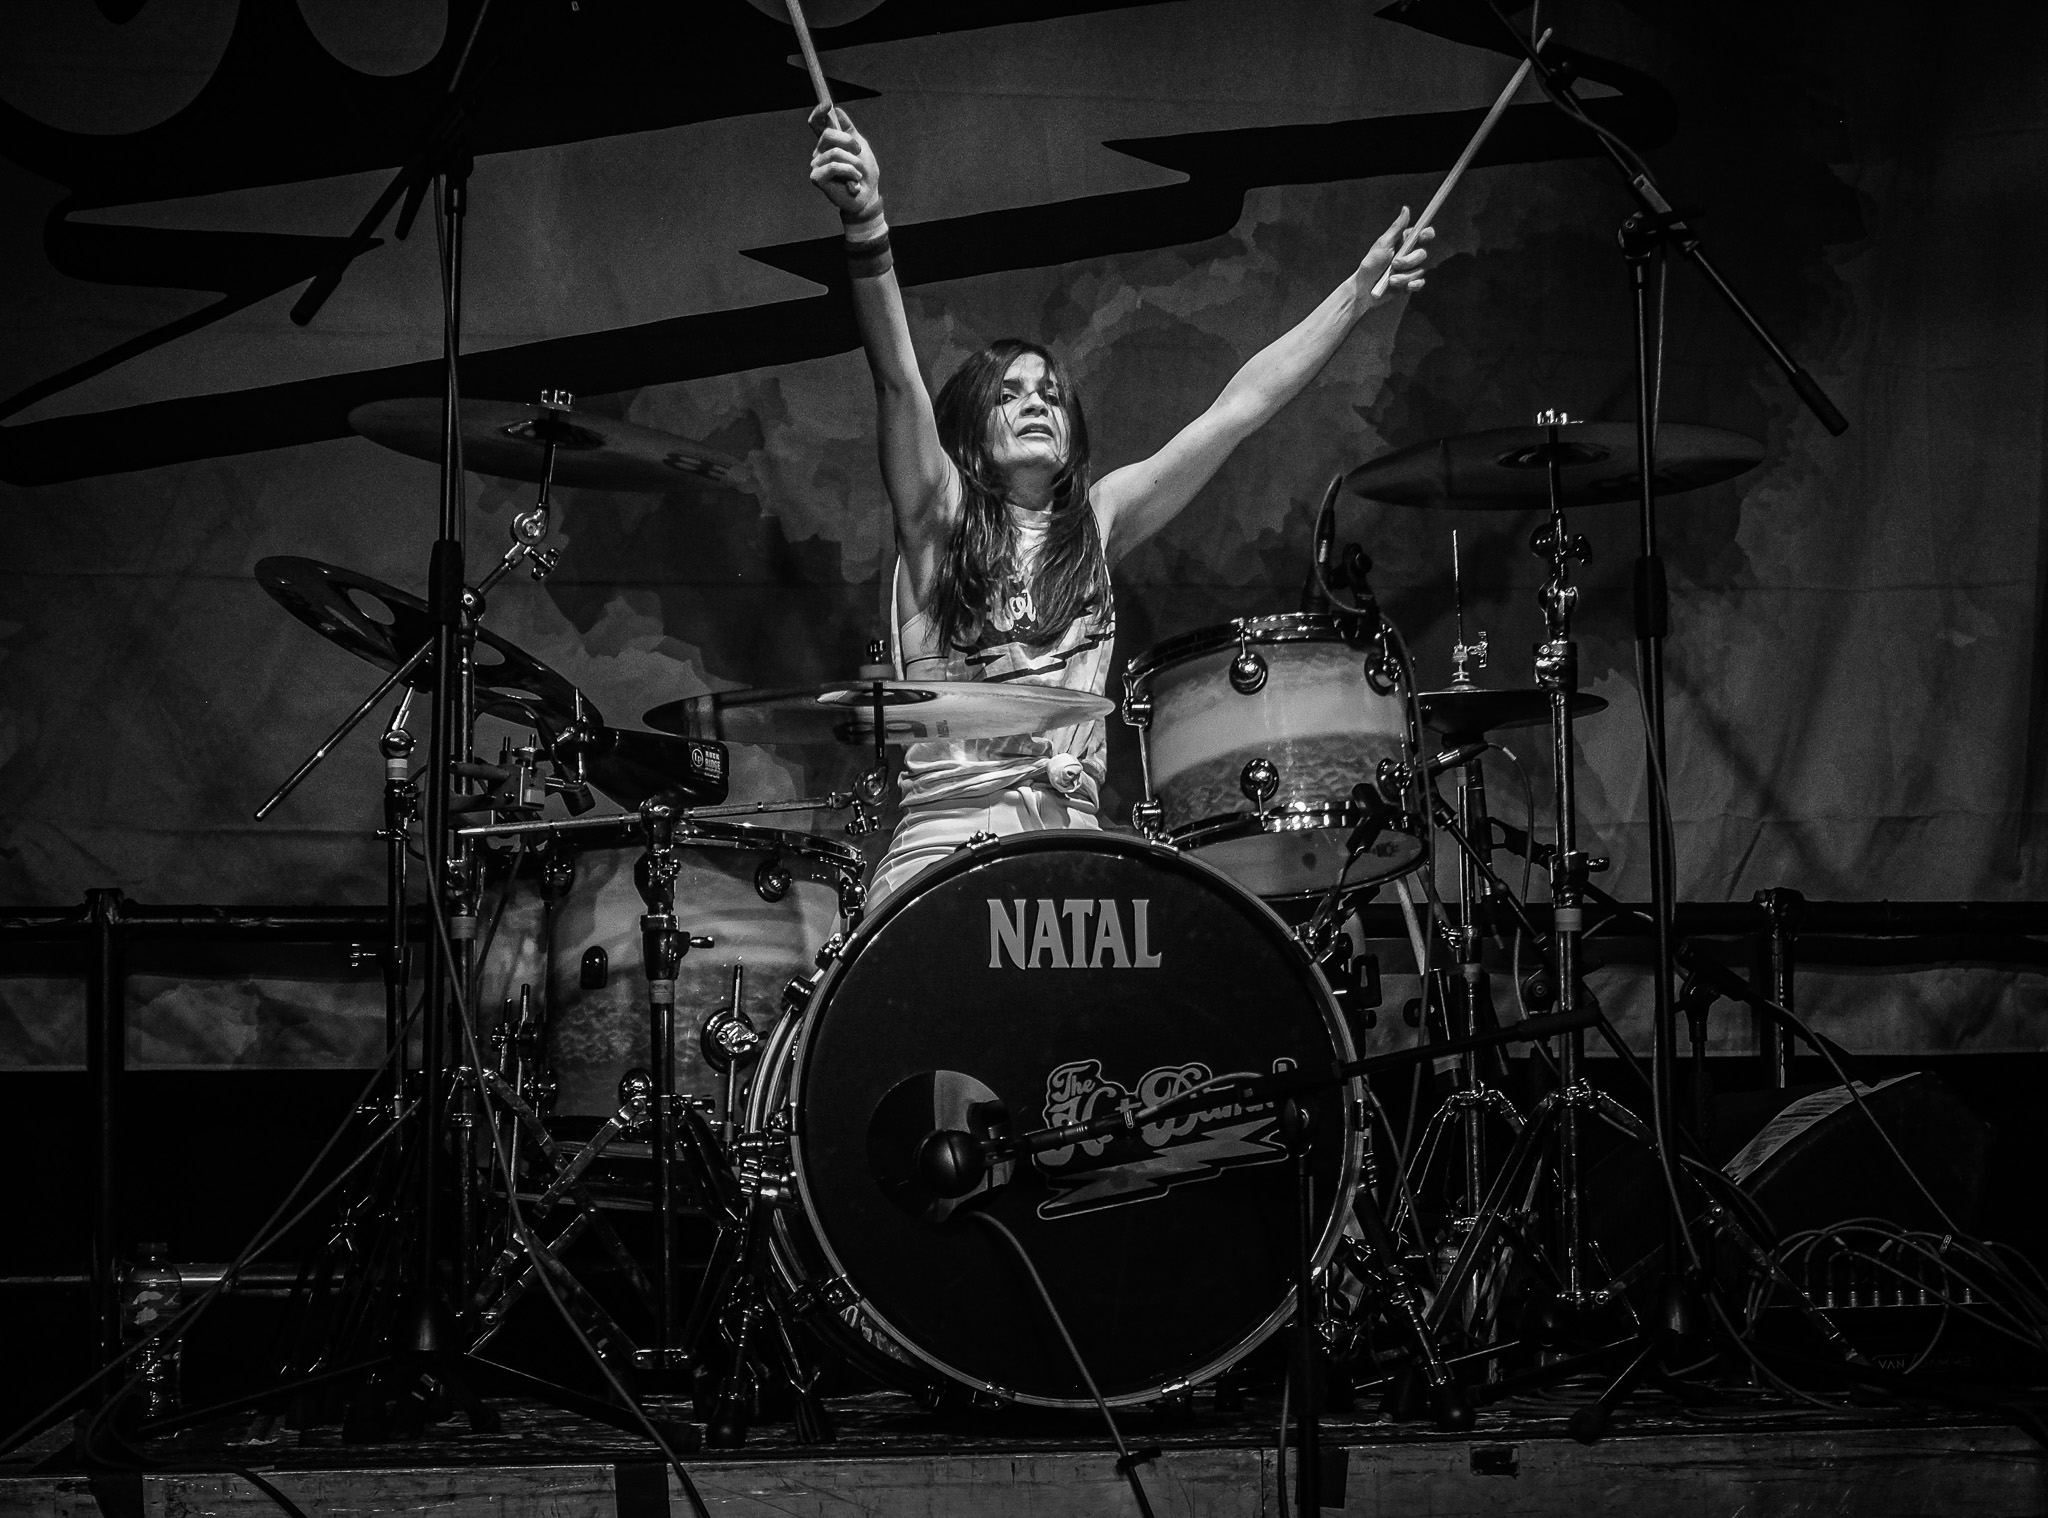 A female drummer with her arms raised in black and white